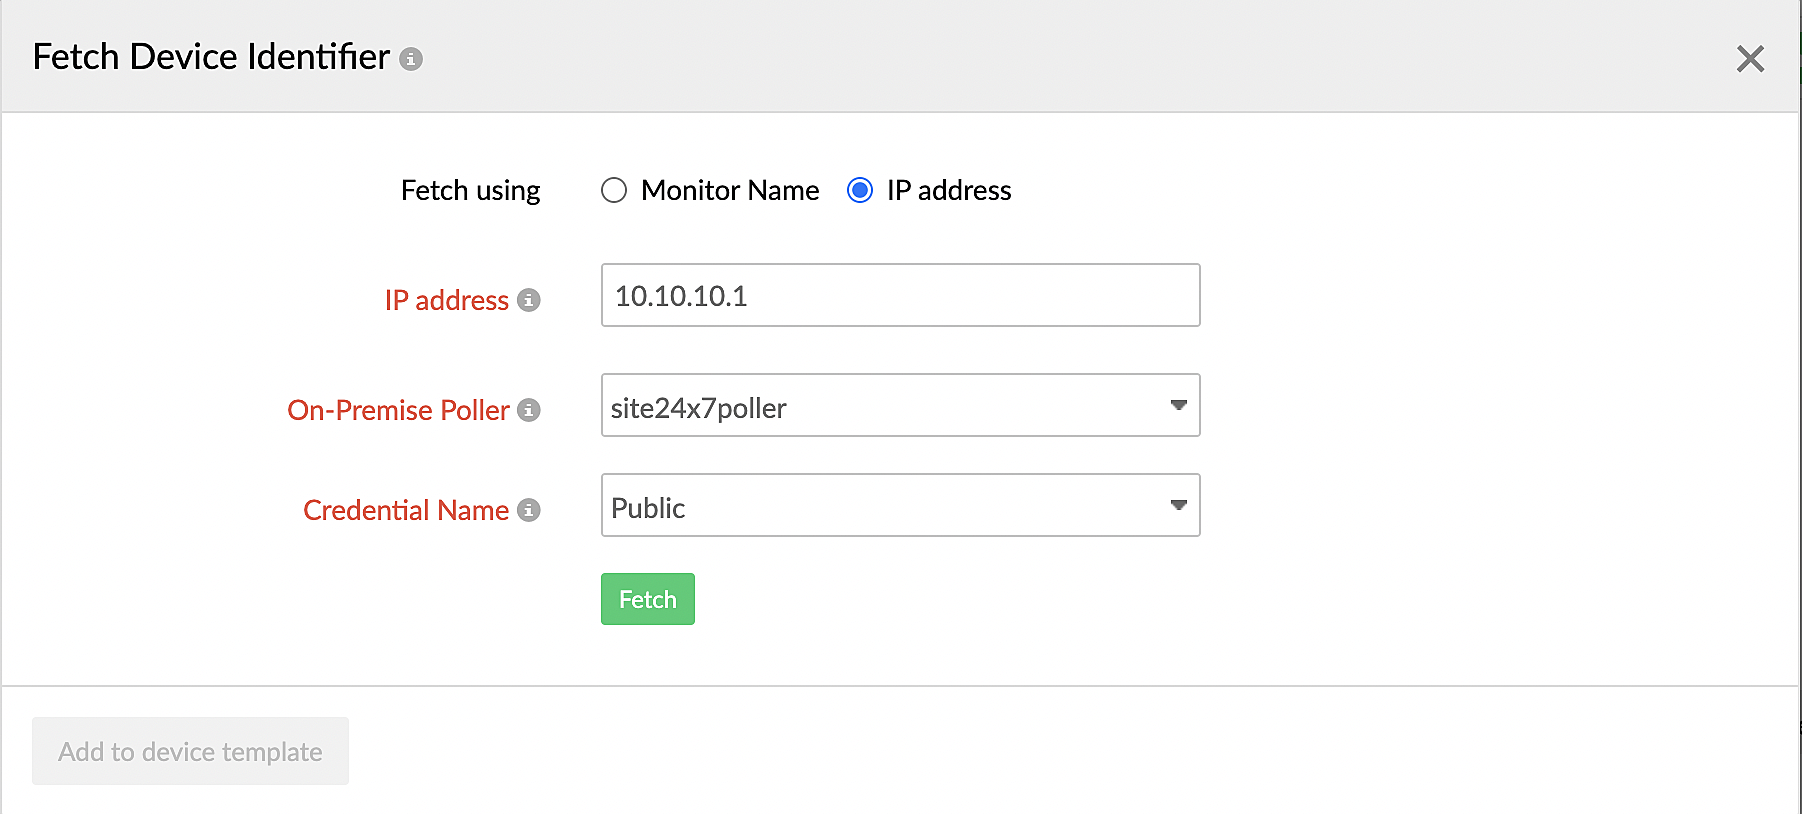 Fetching the device identifier by providing the IP address